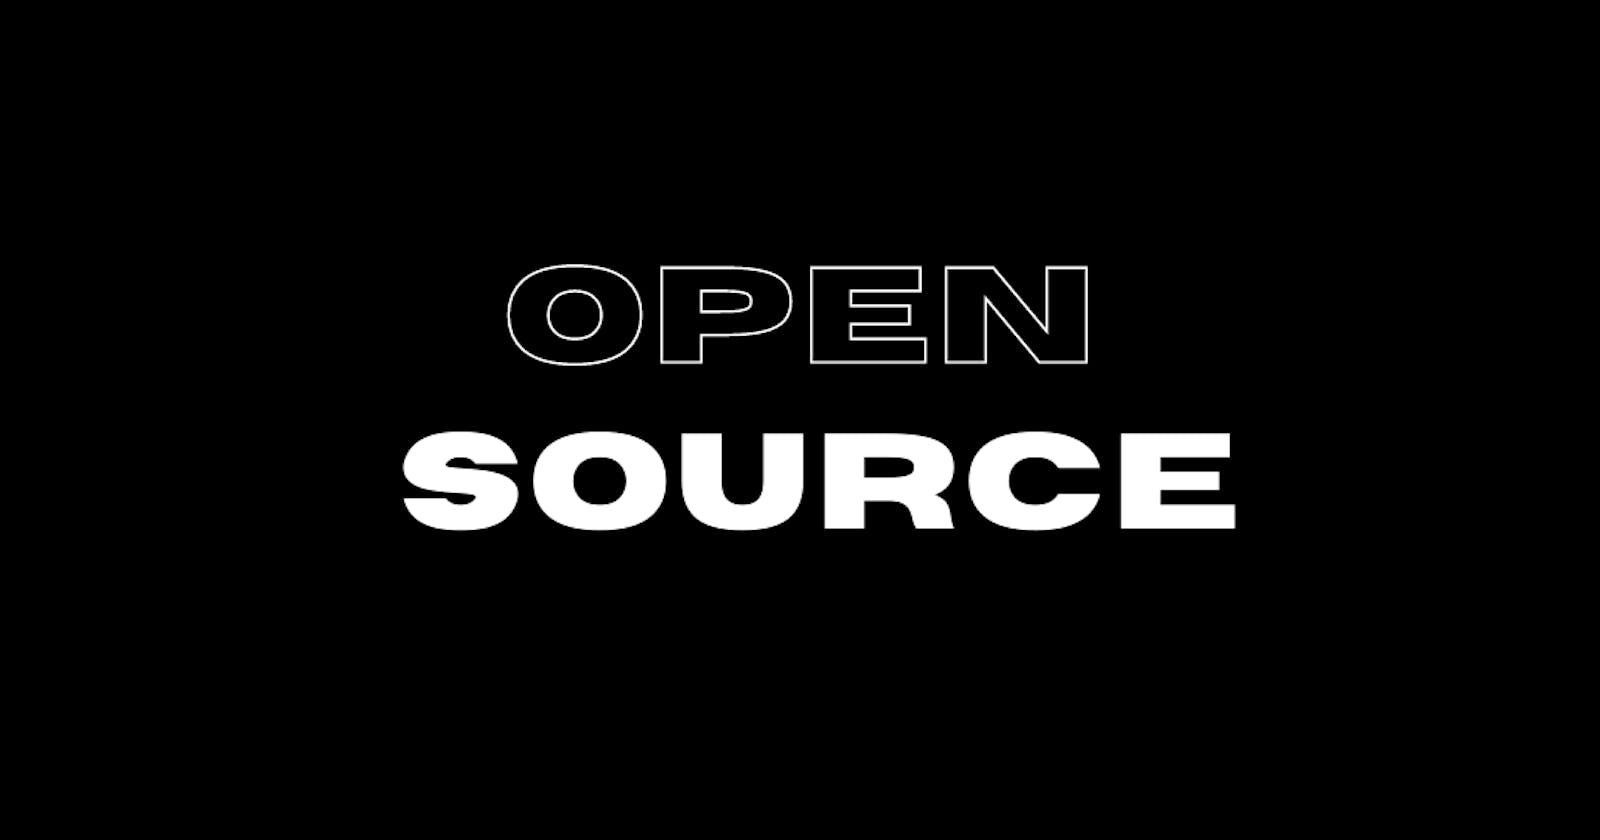 Explaining Open Source to a five-year-old